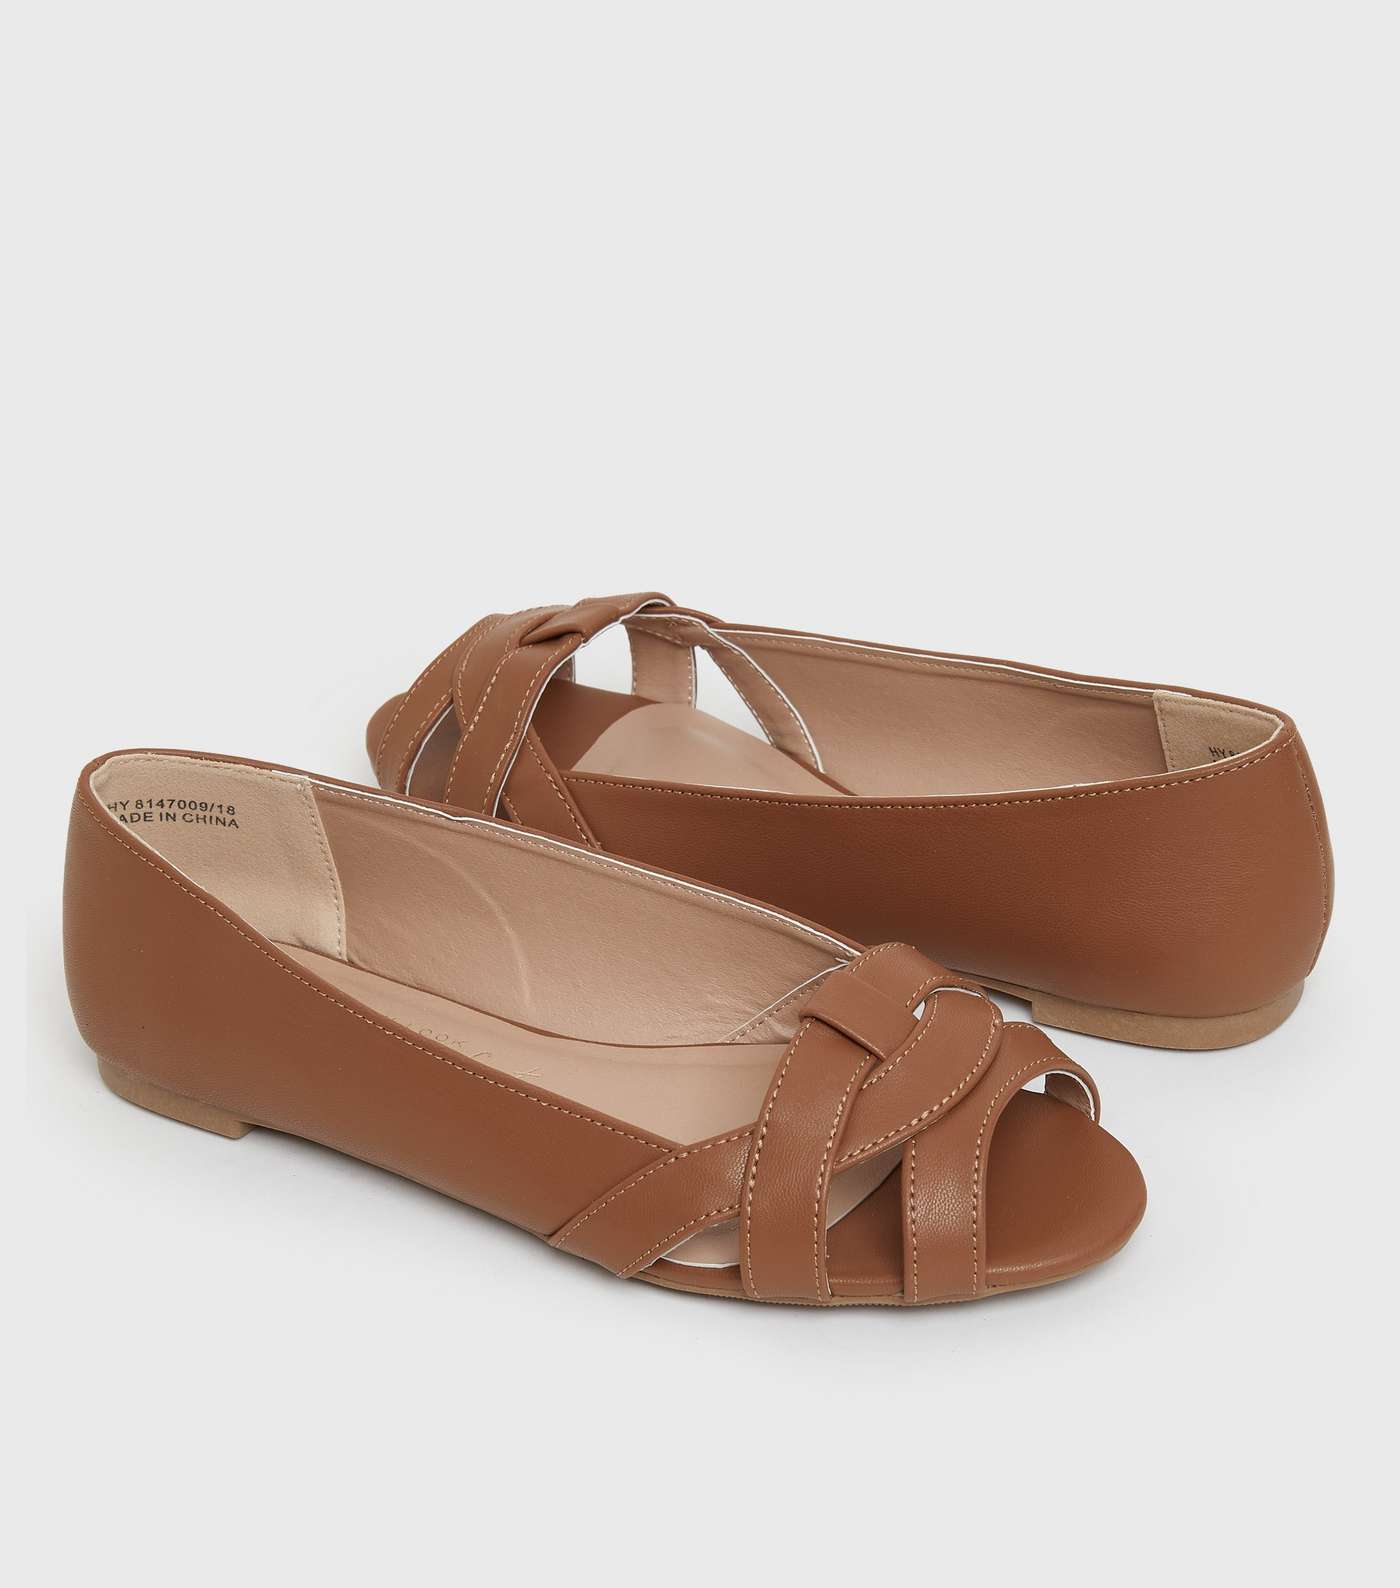 Wide Fit Tan Strappy Open Toe Sandals Image 3